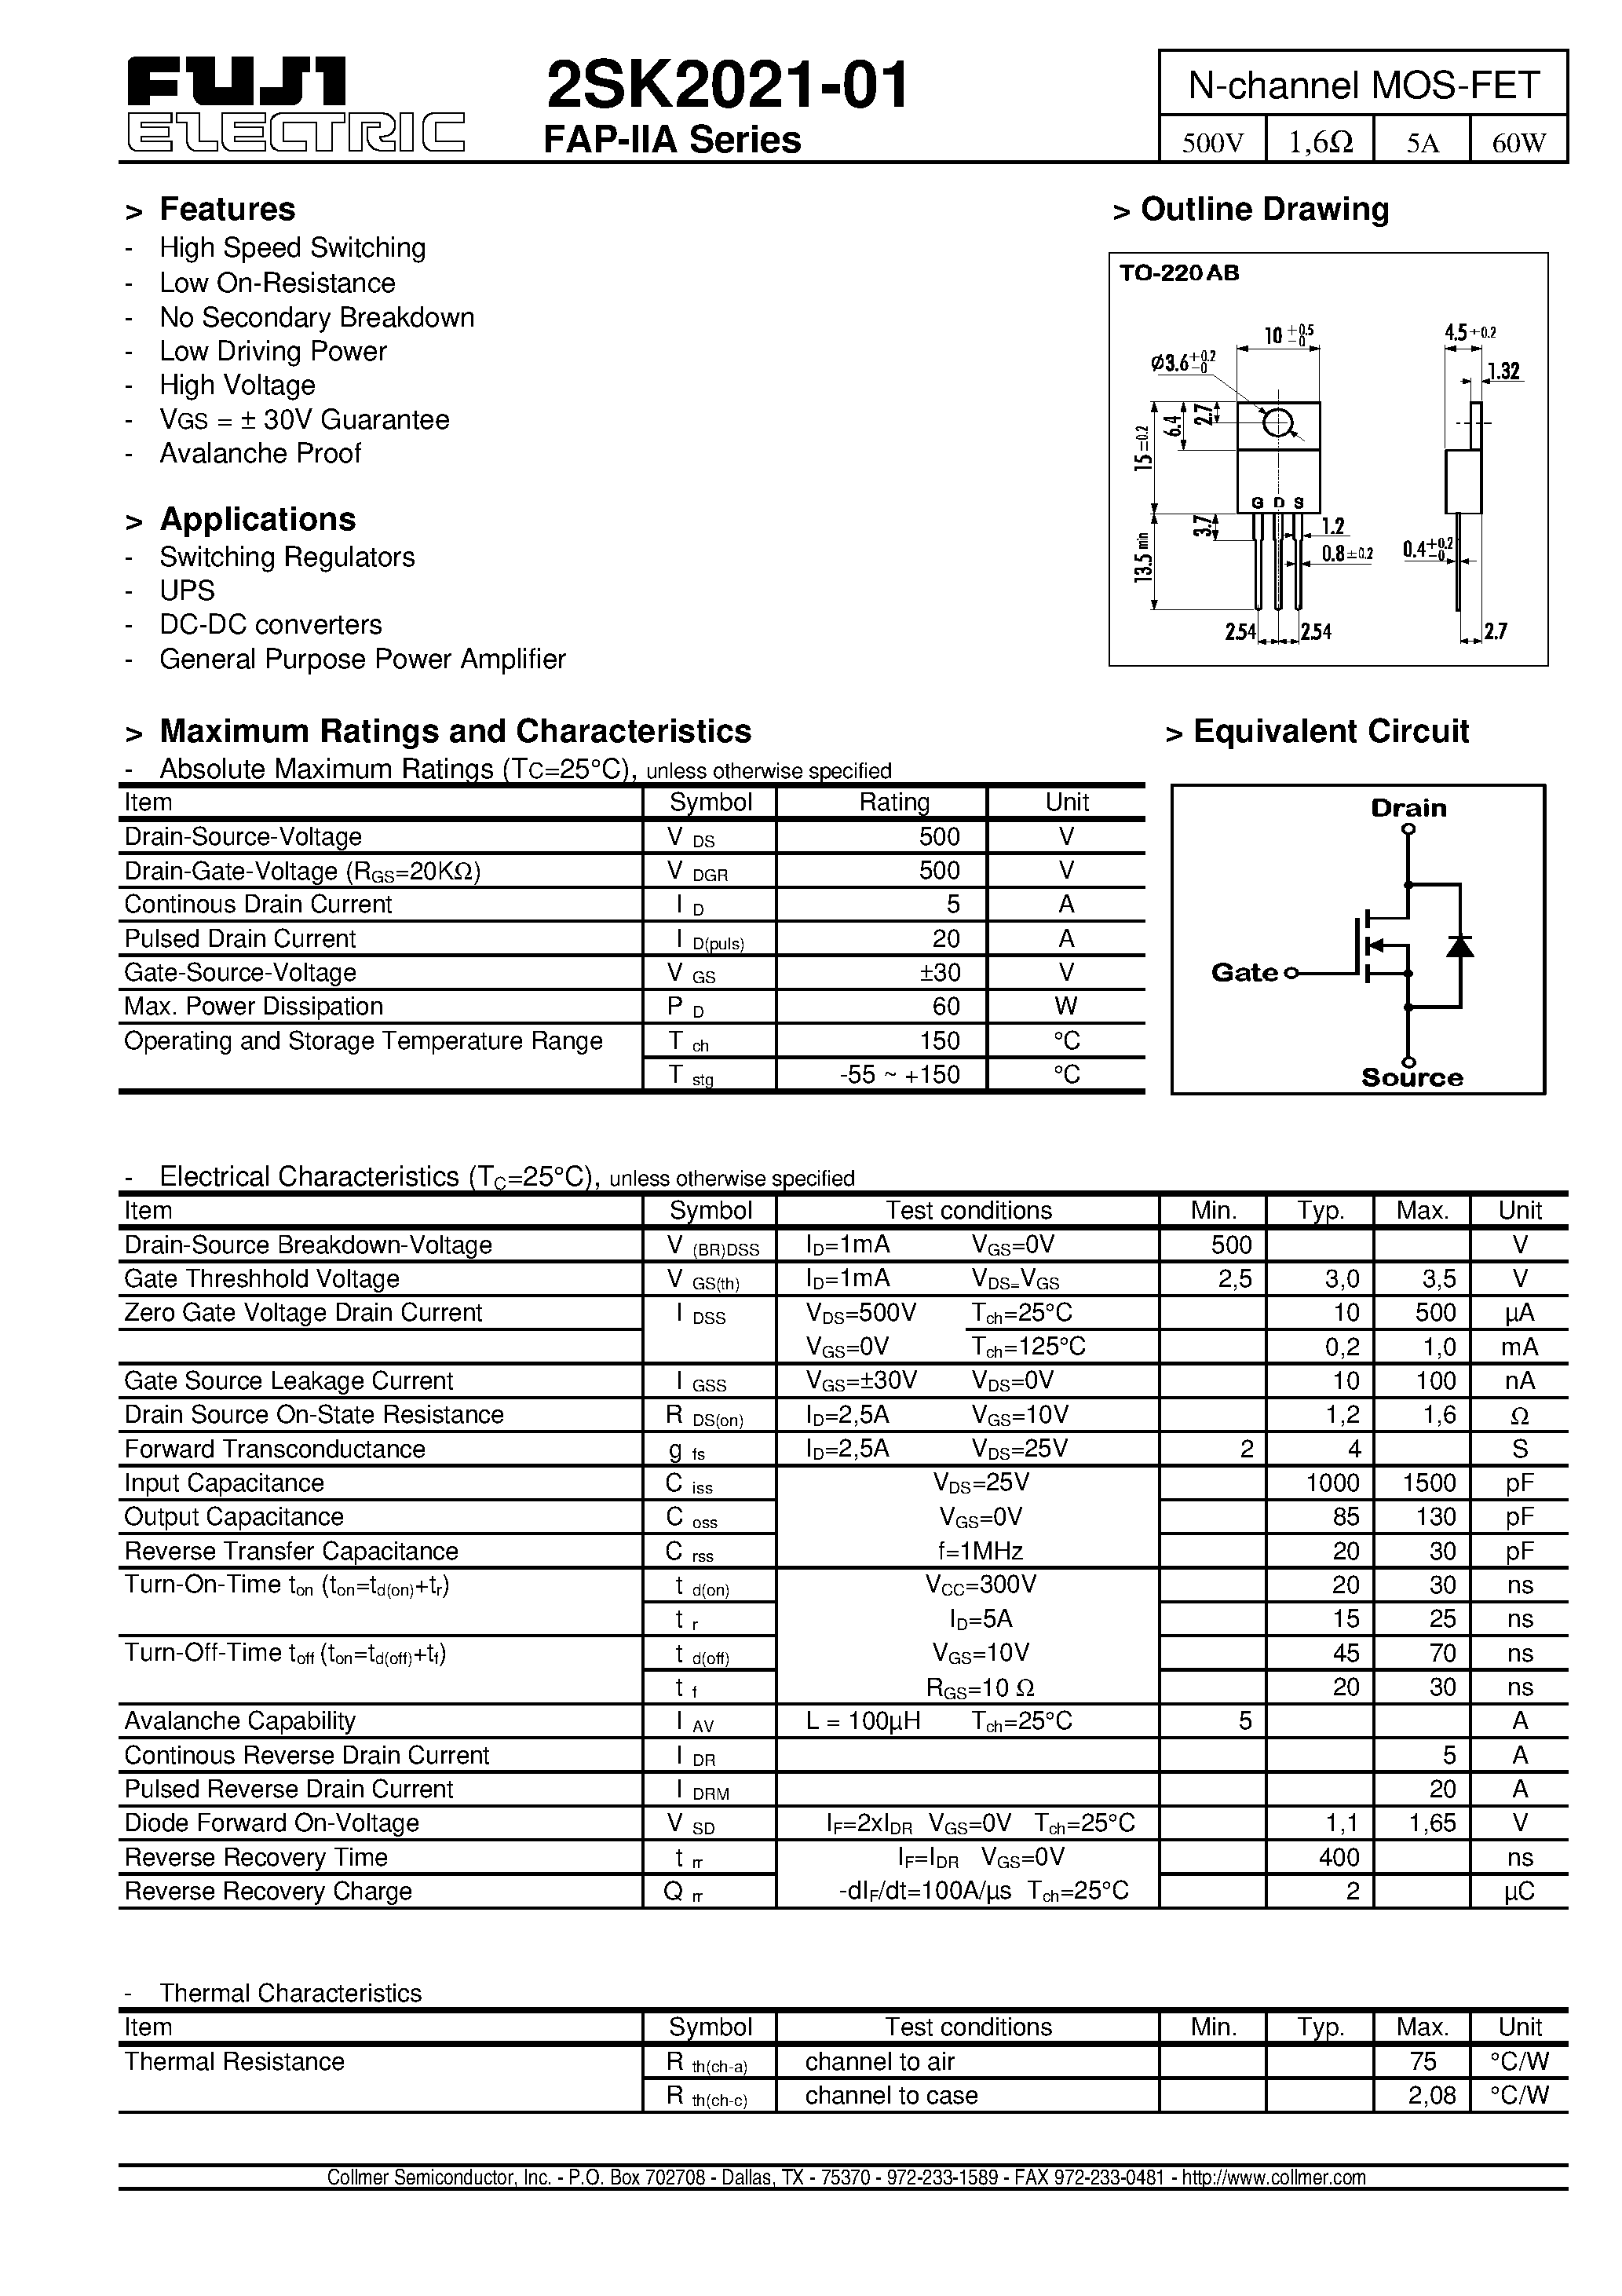 Datasheet 2SK2021-01 - N-channel MOS-FET page 1